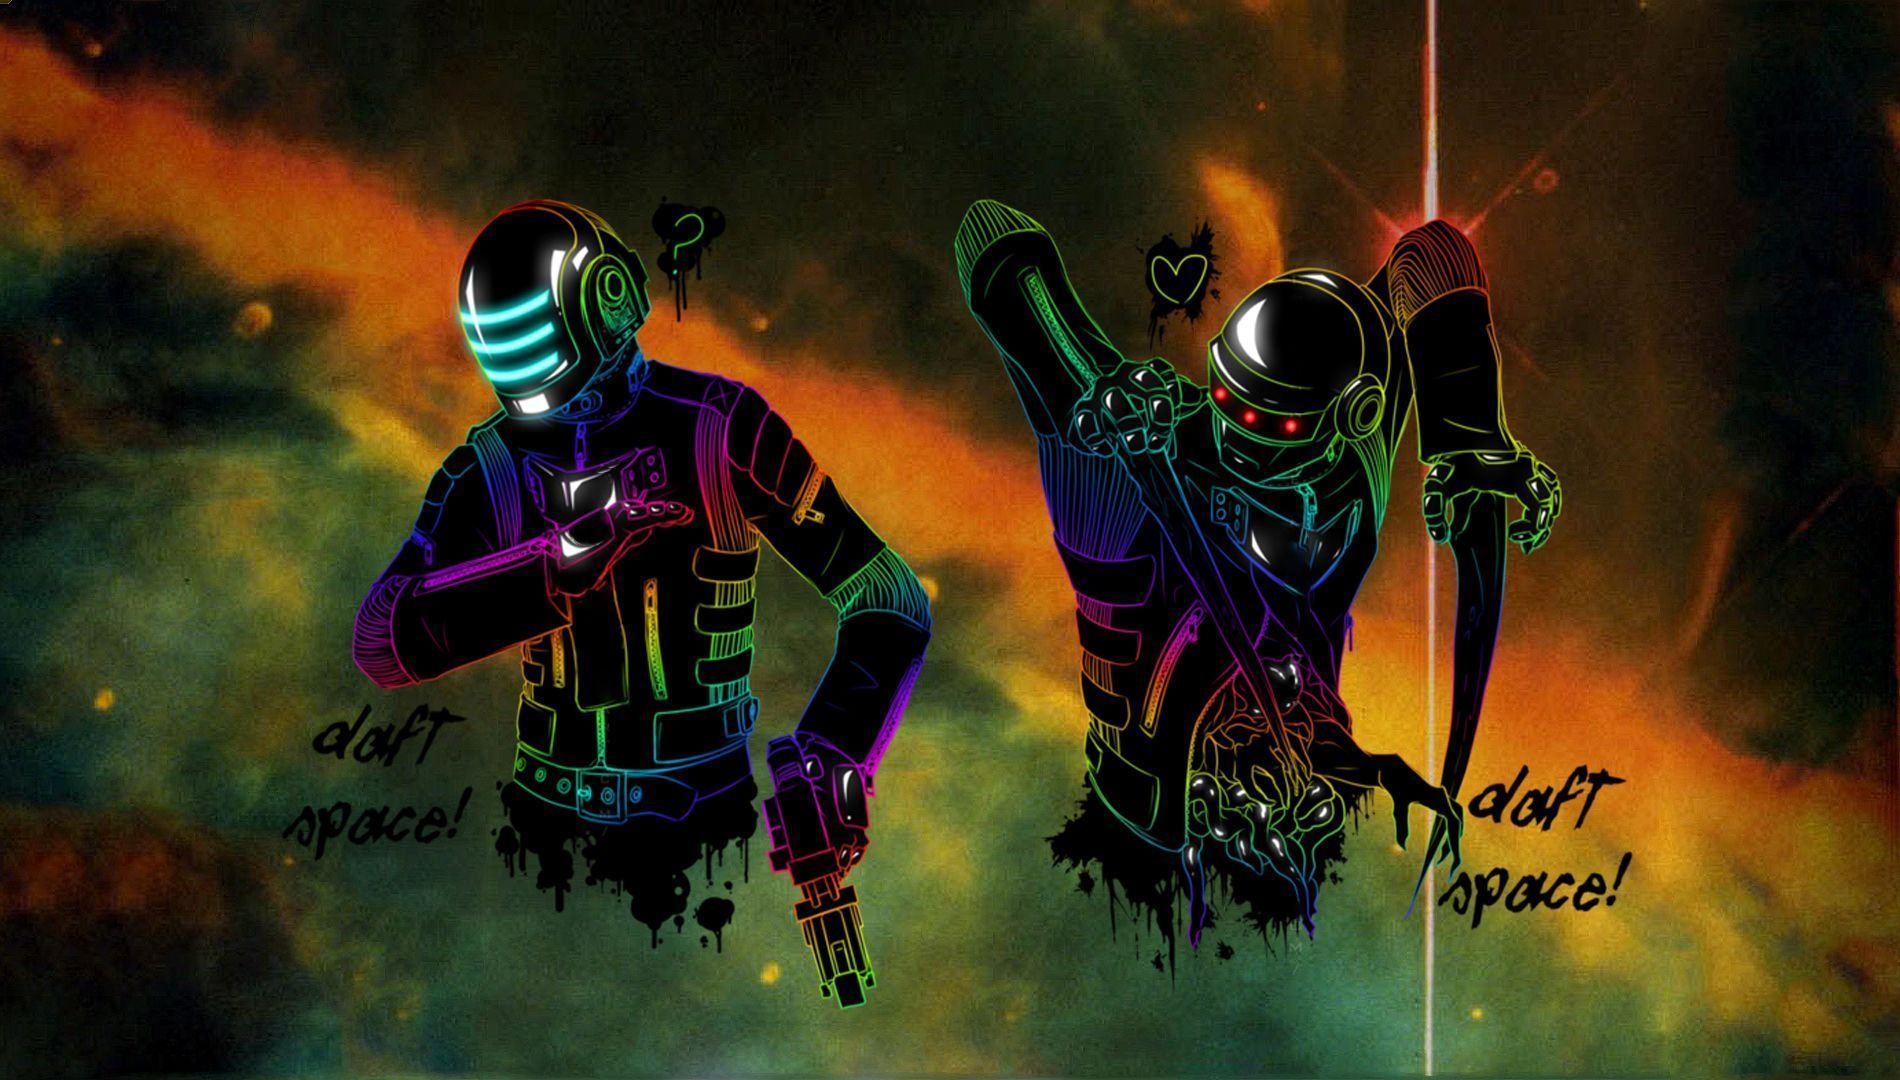 254 Daft Punk HD Wallpapers | Backgrounds - Wallpaper Abyss - Page 5